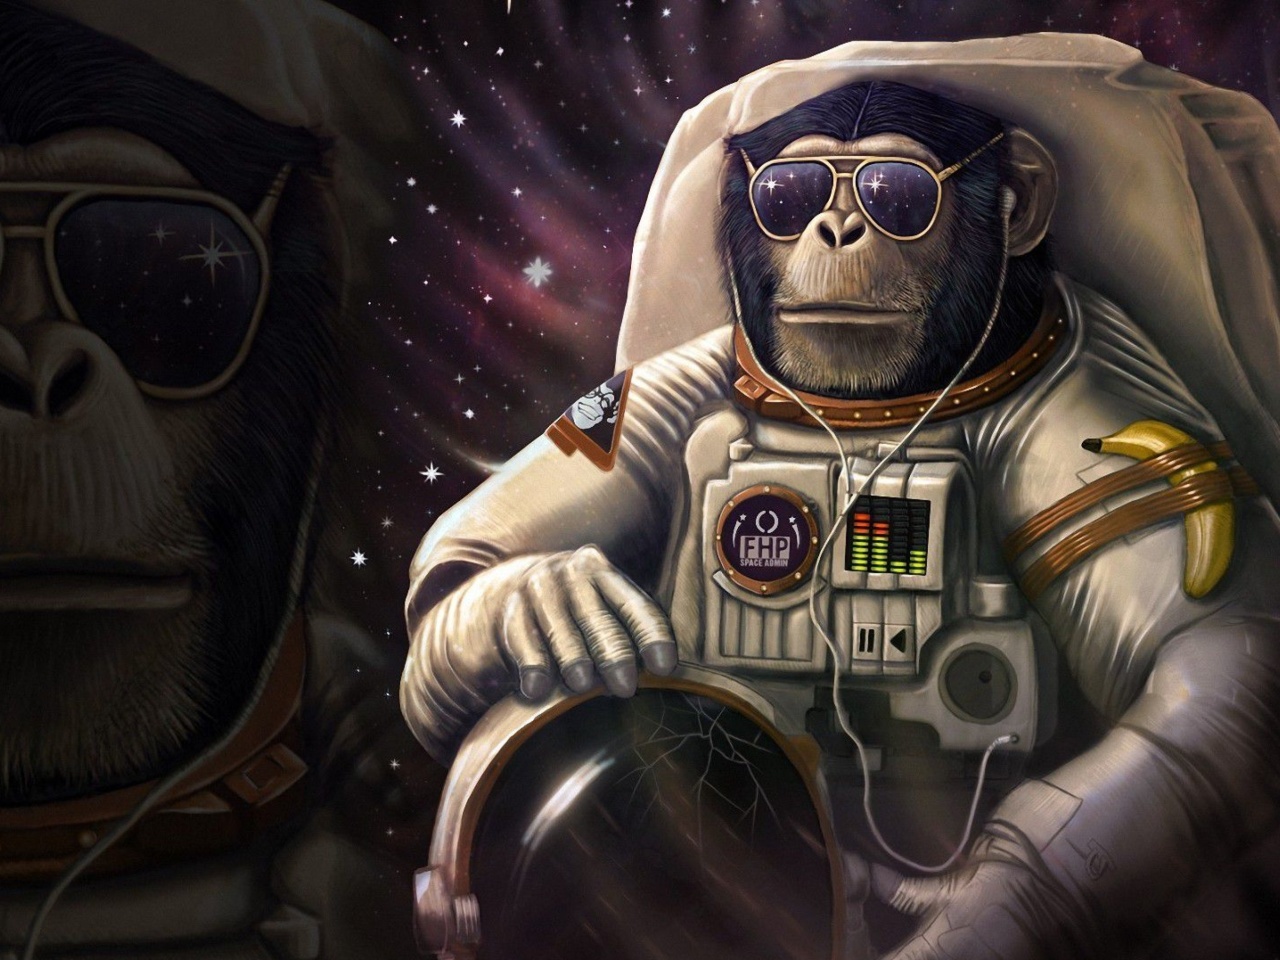 Monkeys and apes in space screenshot #1 1280x960